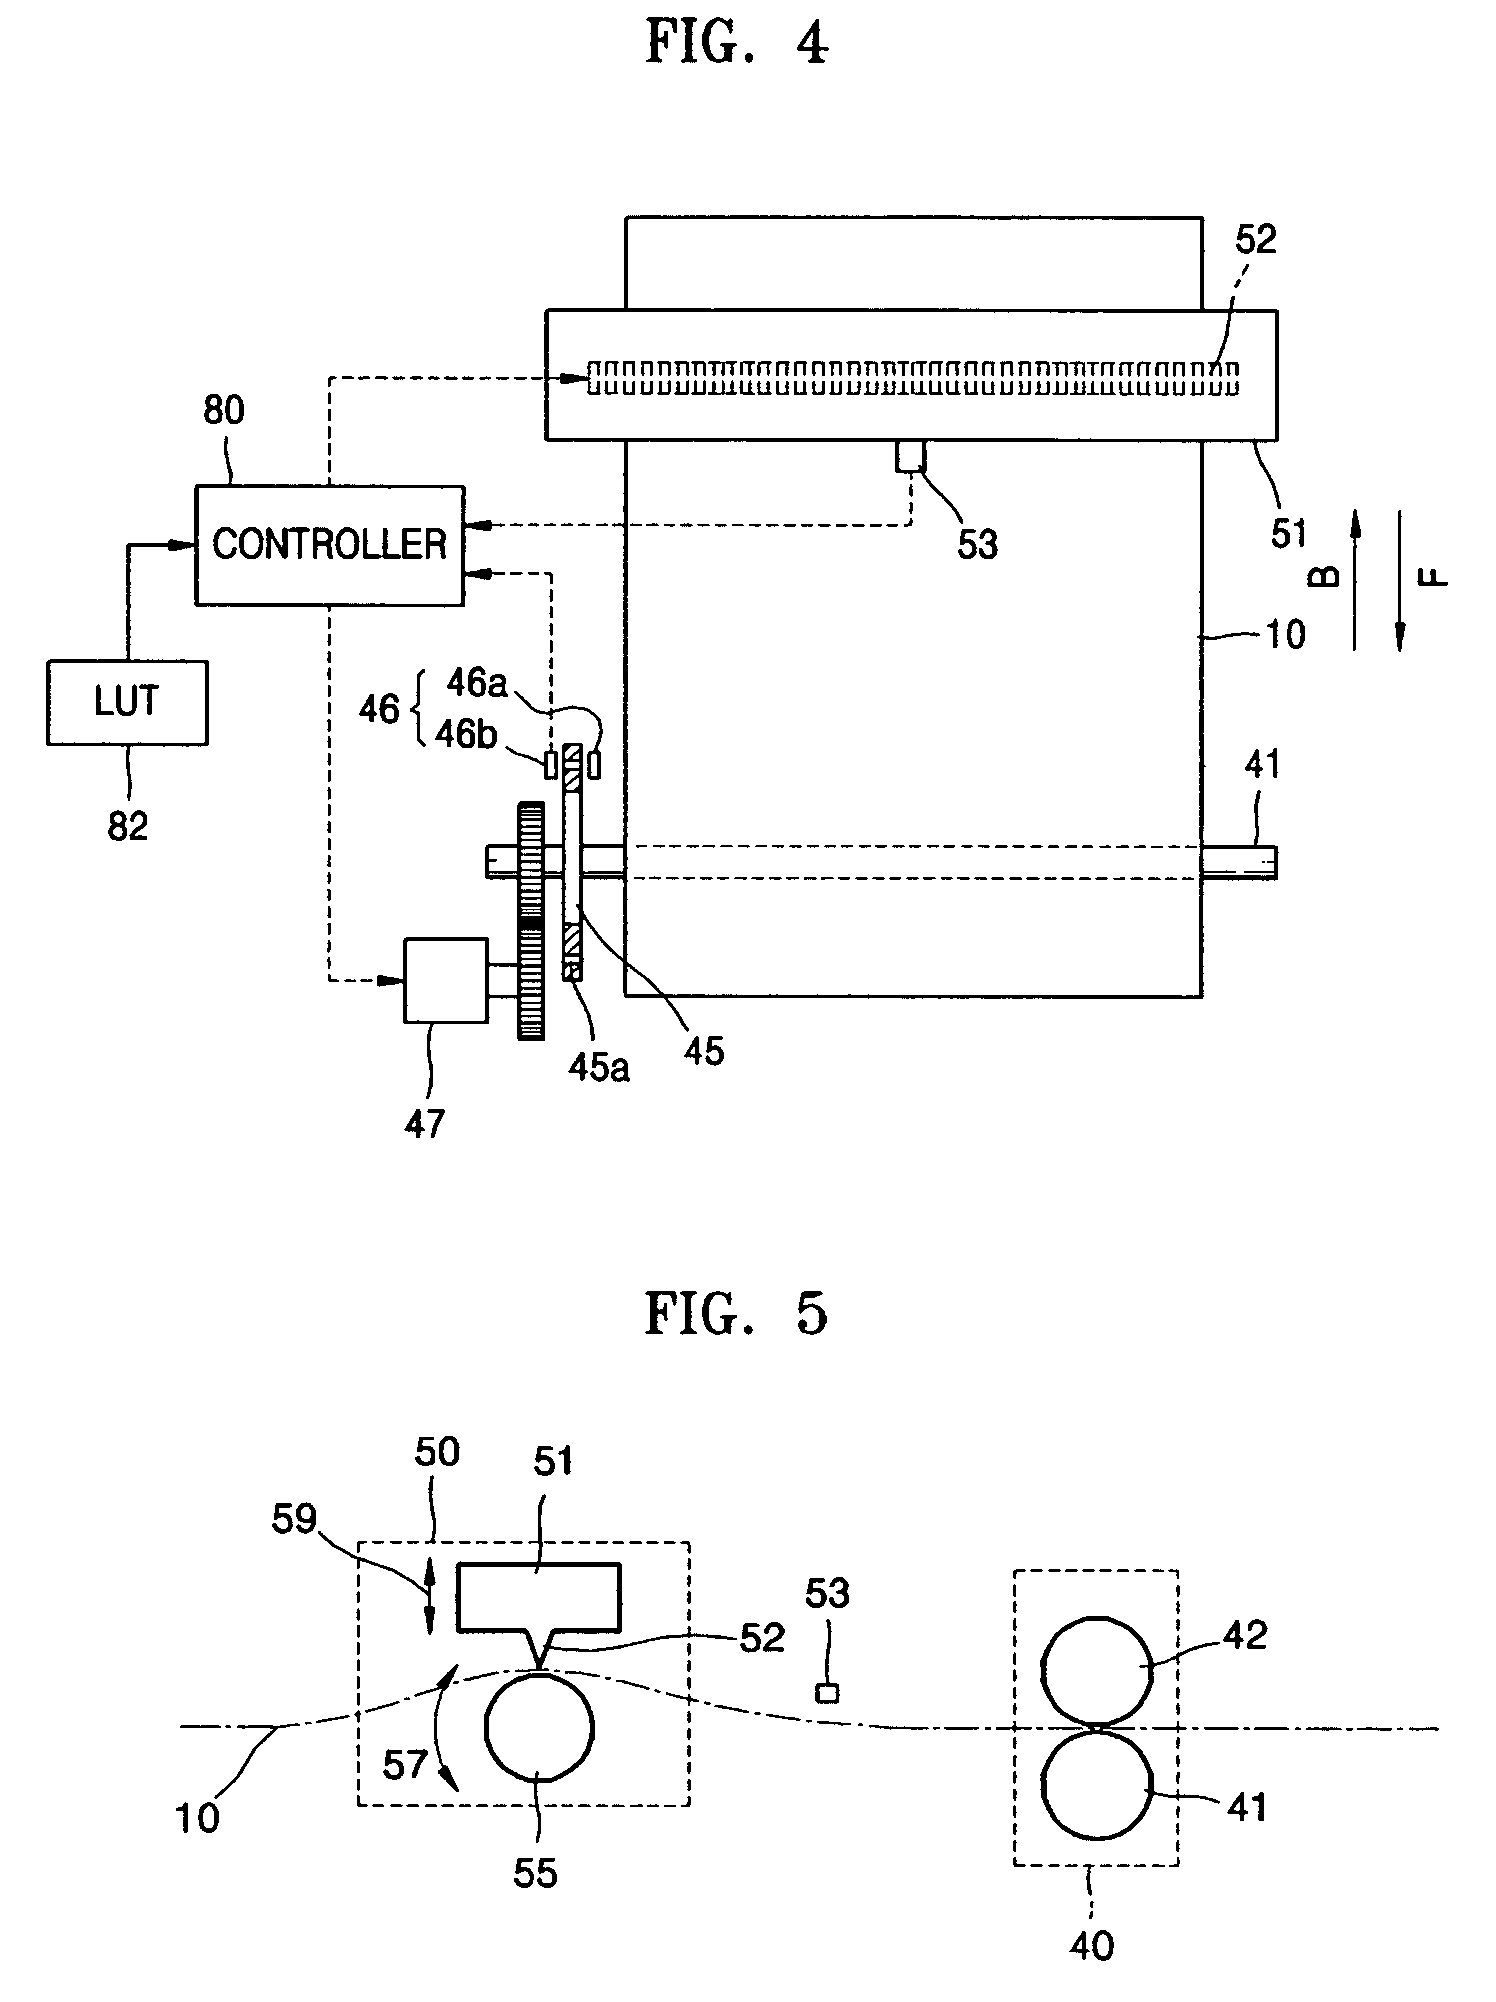 Method of differentiating types of heat sensitive paper